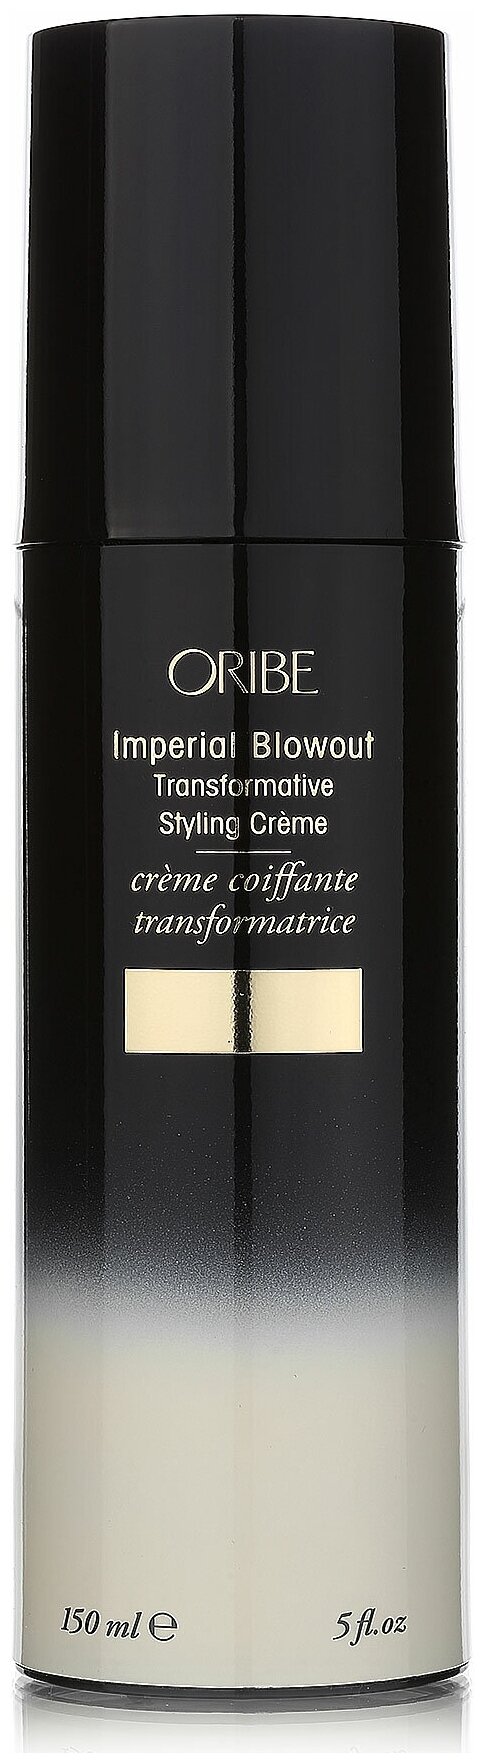 ORIBE Крем Imperial Blowout Transformative Styling Creme, 150 мл